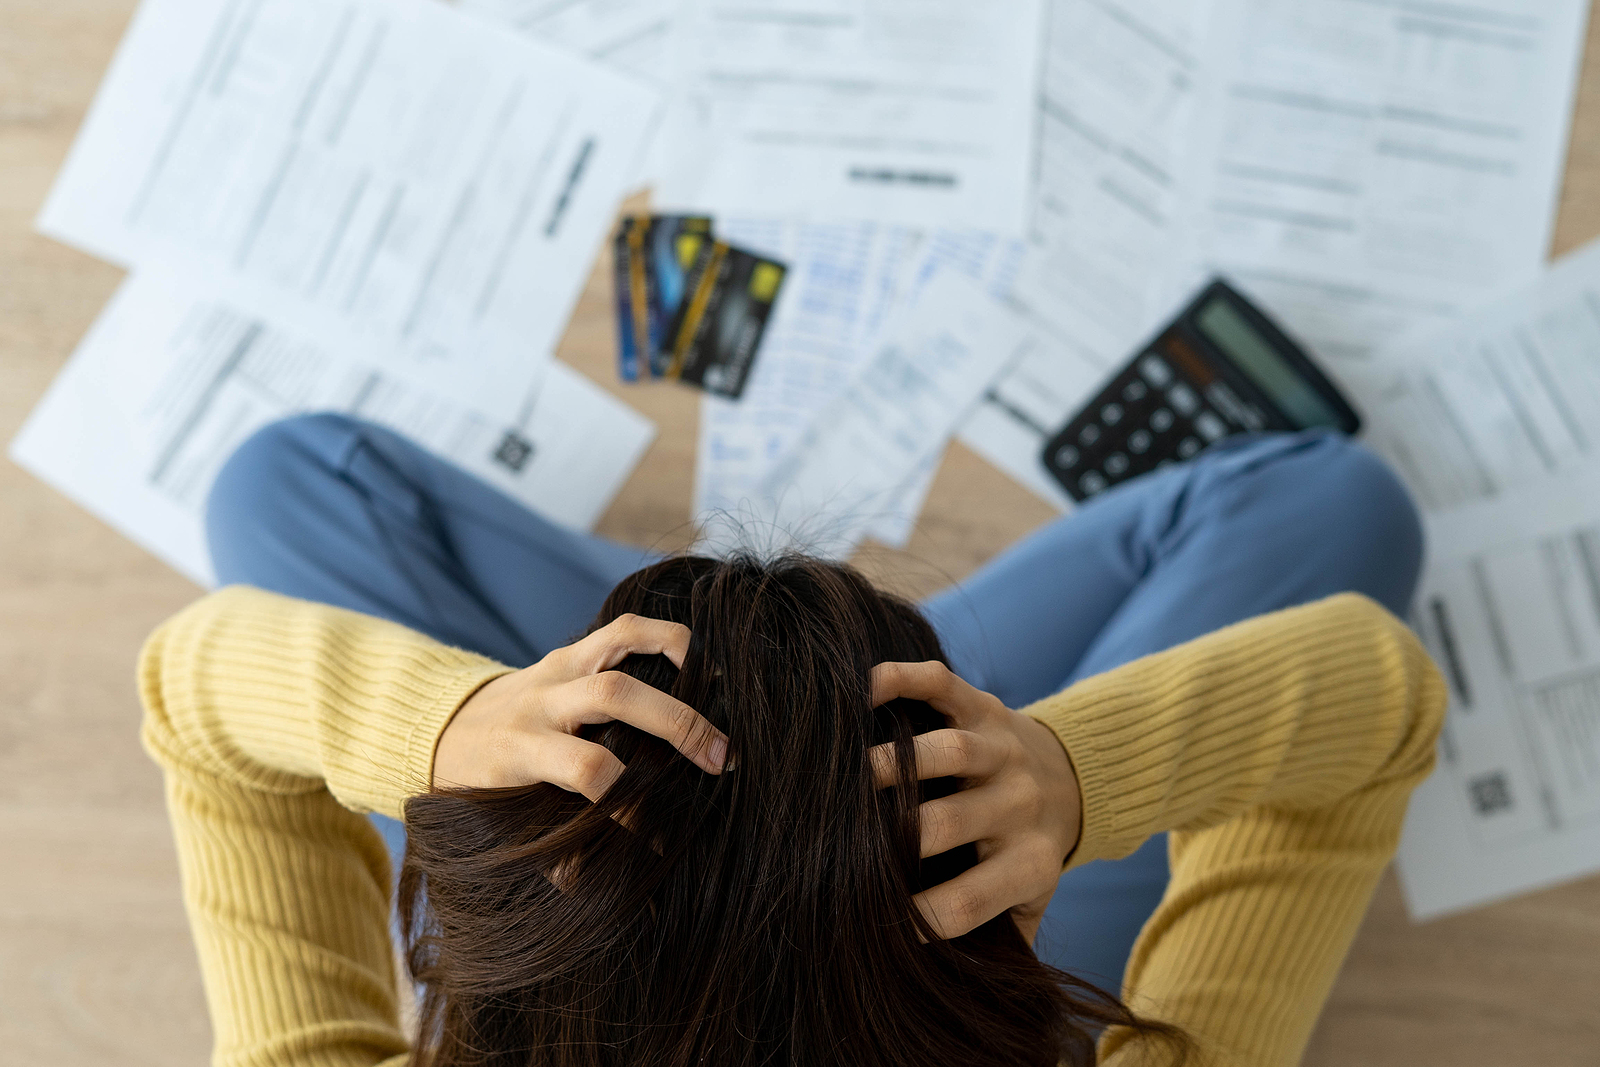 Women Stress About A Lot Of Credit Card Debt And Bills On The Floor